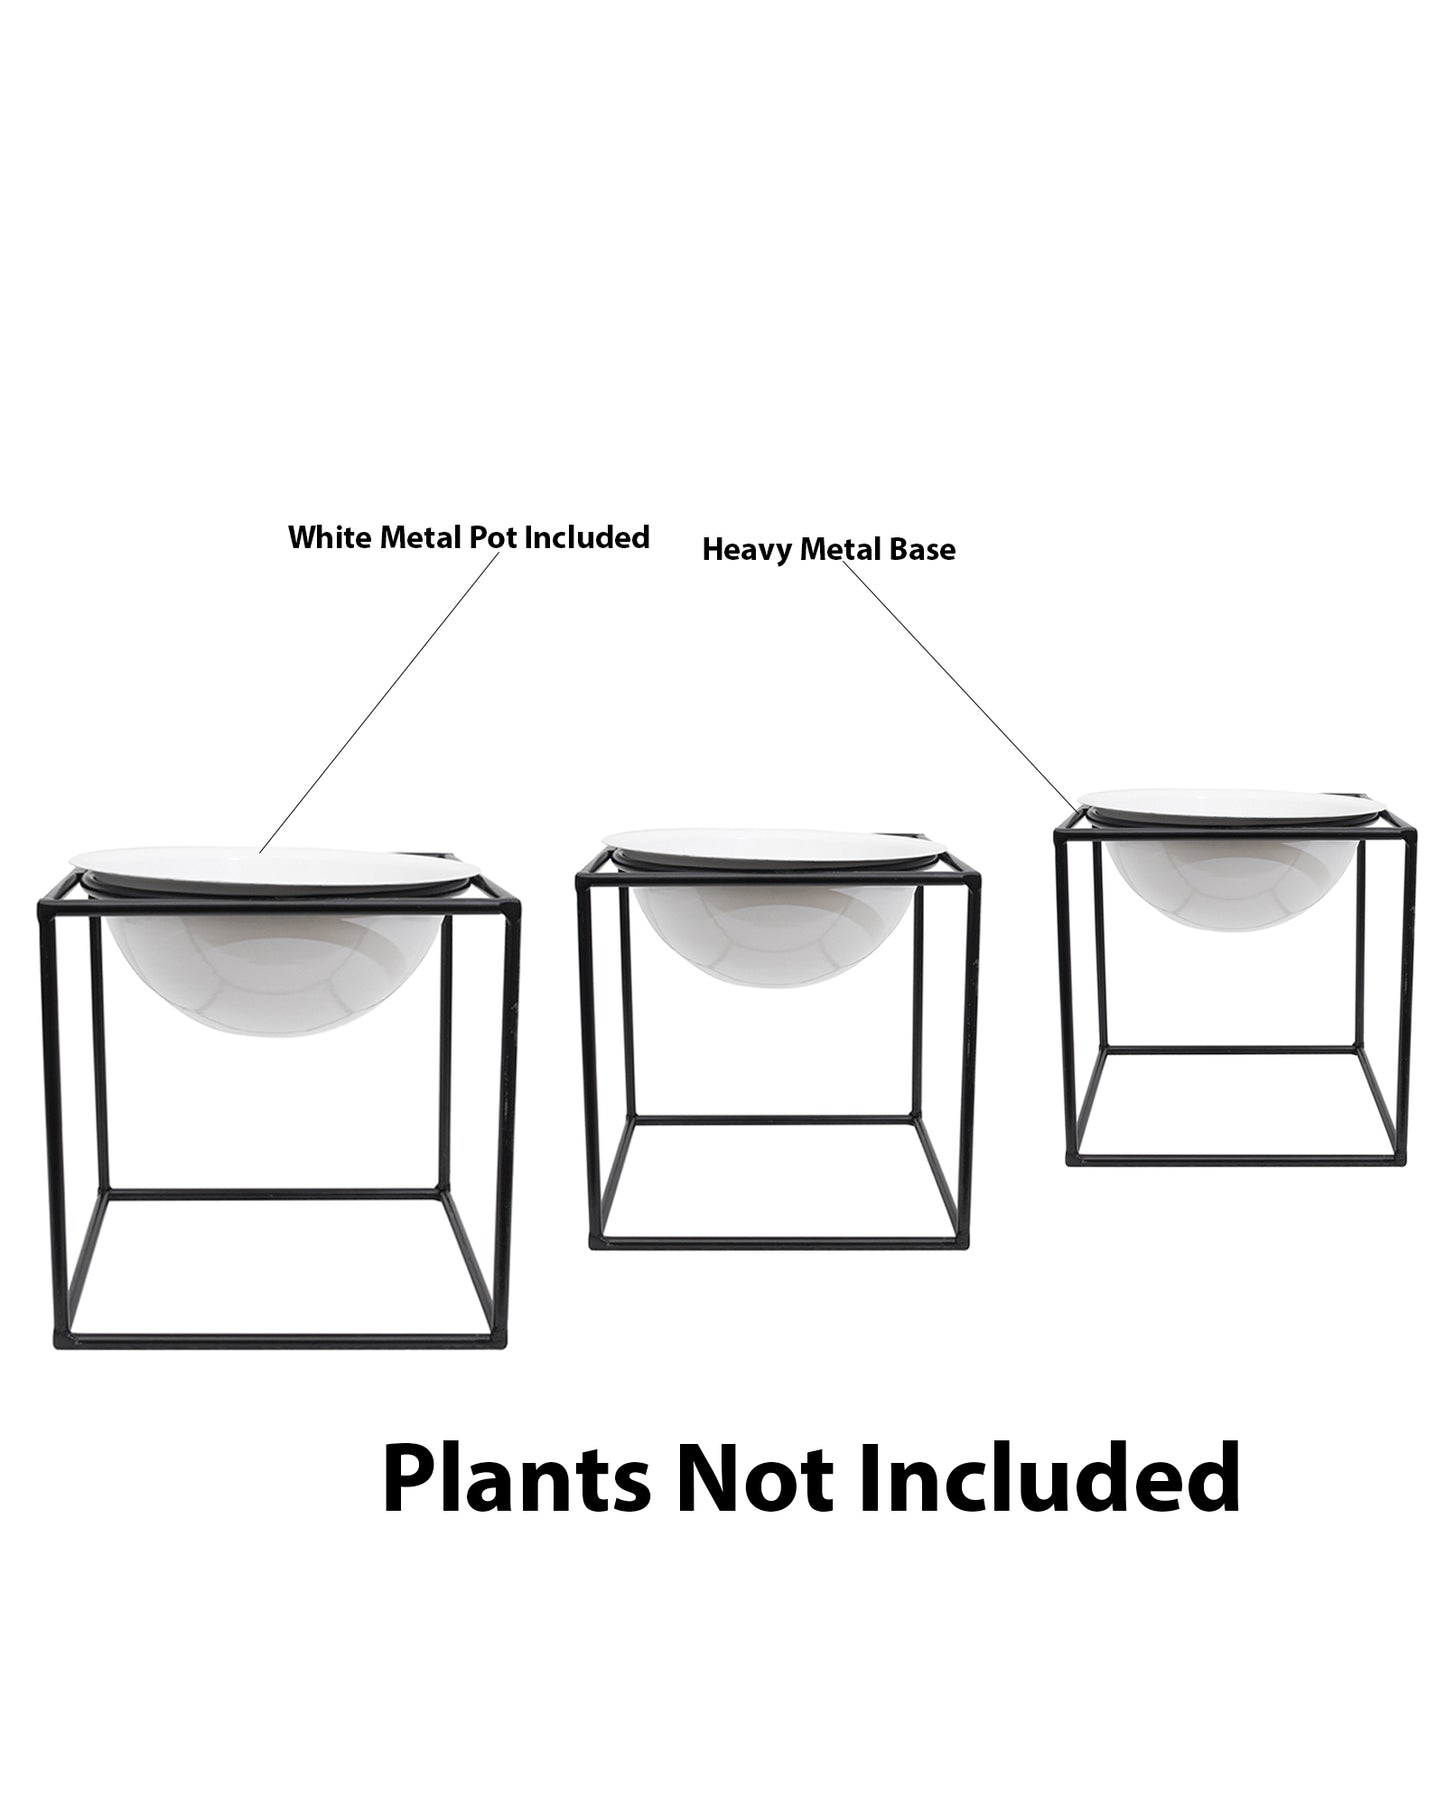 Metal Planters Outdoor & Indoor, Metal Farmhouse Decor for Garden, Patio, Porch & Balcony, Pots with Stand, Front Door Decorative set of 3, Black Cube Base, White